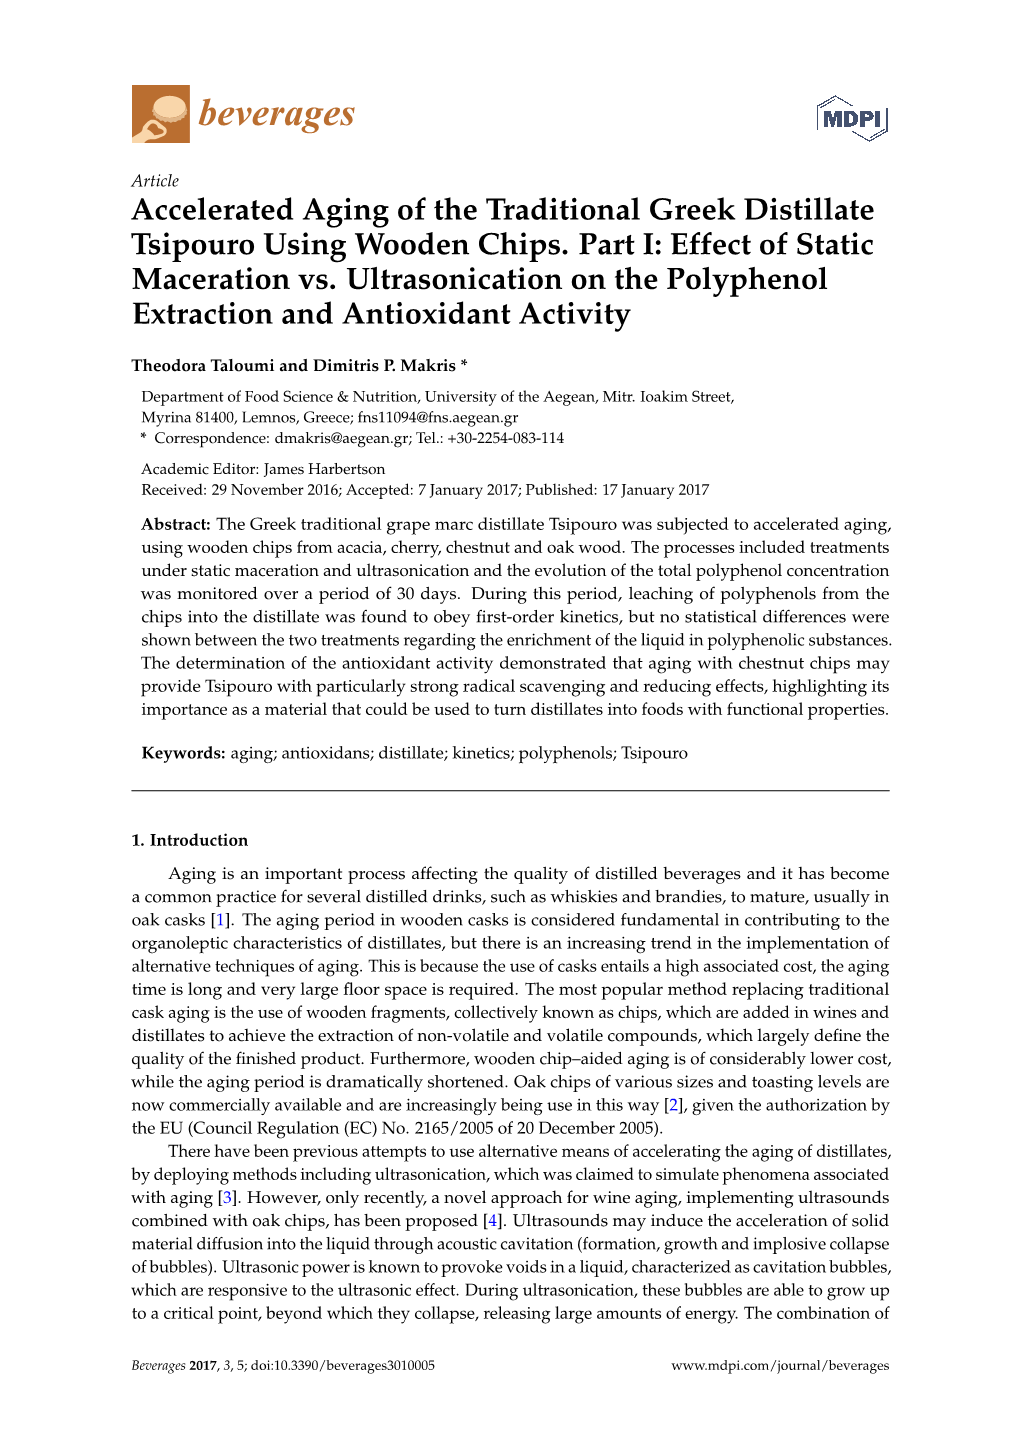 Accelerated Aging of the Traditional Greek Distillate Tsipouro Using Wooden Chips